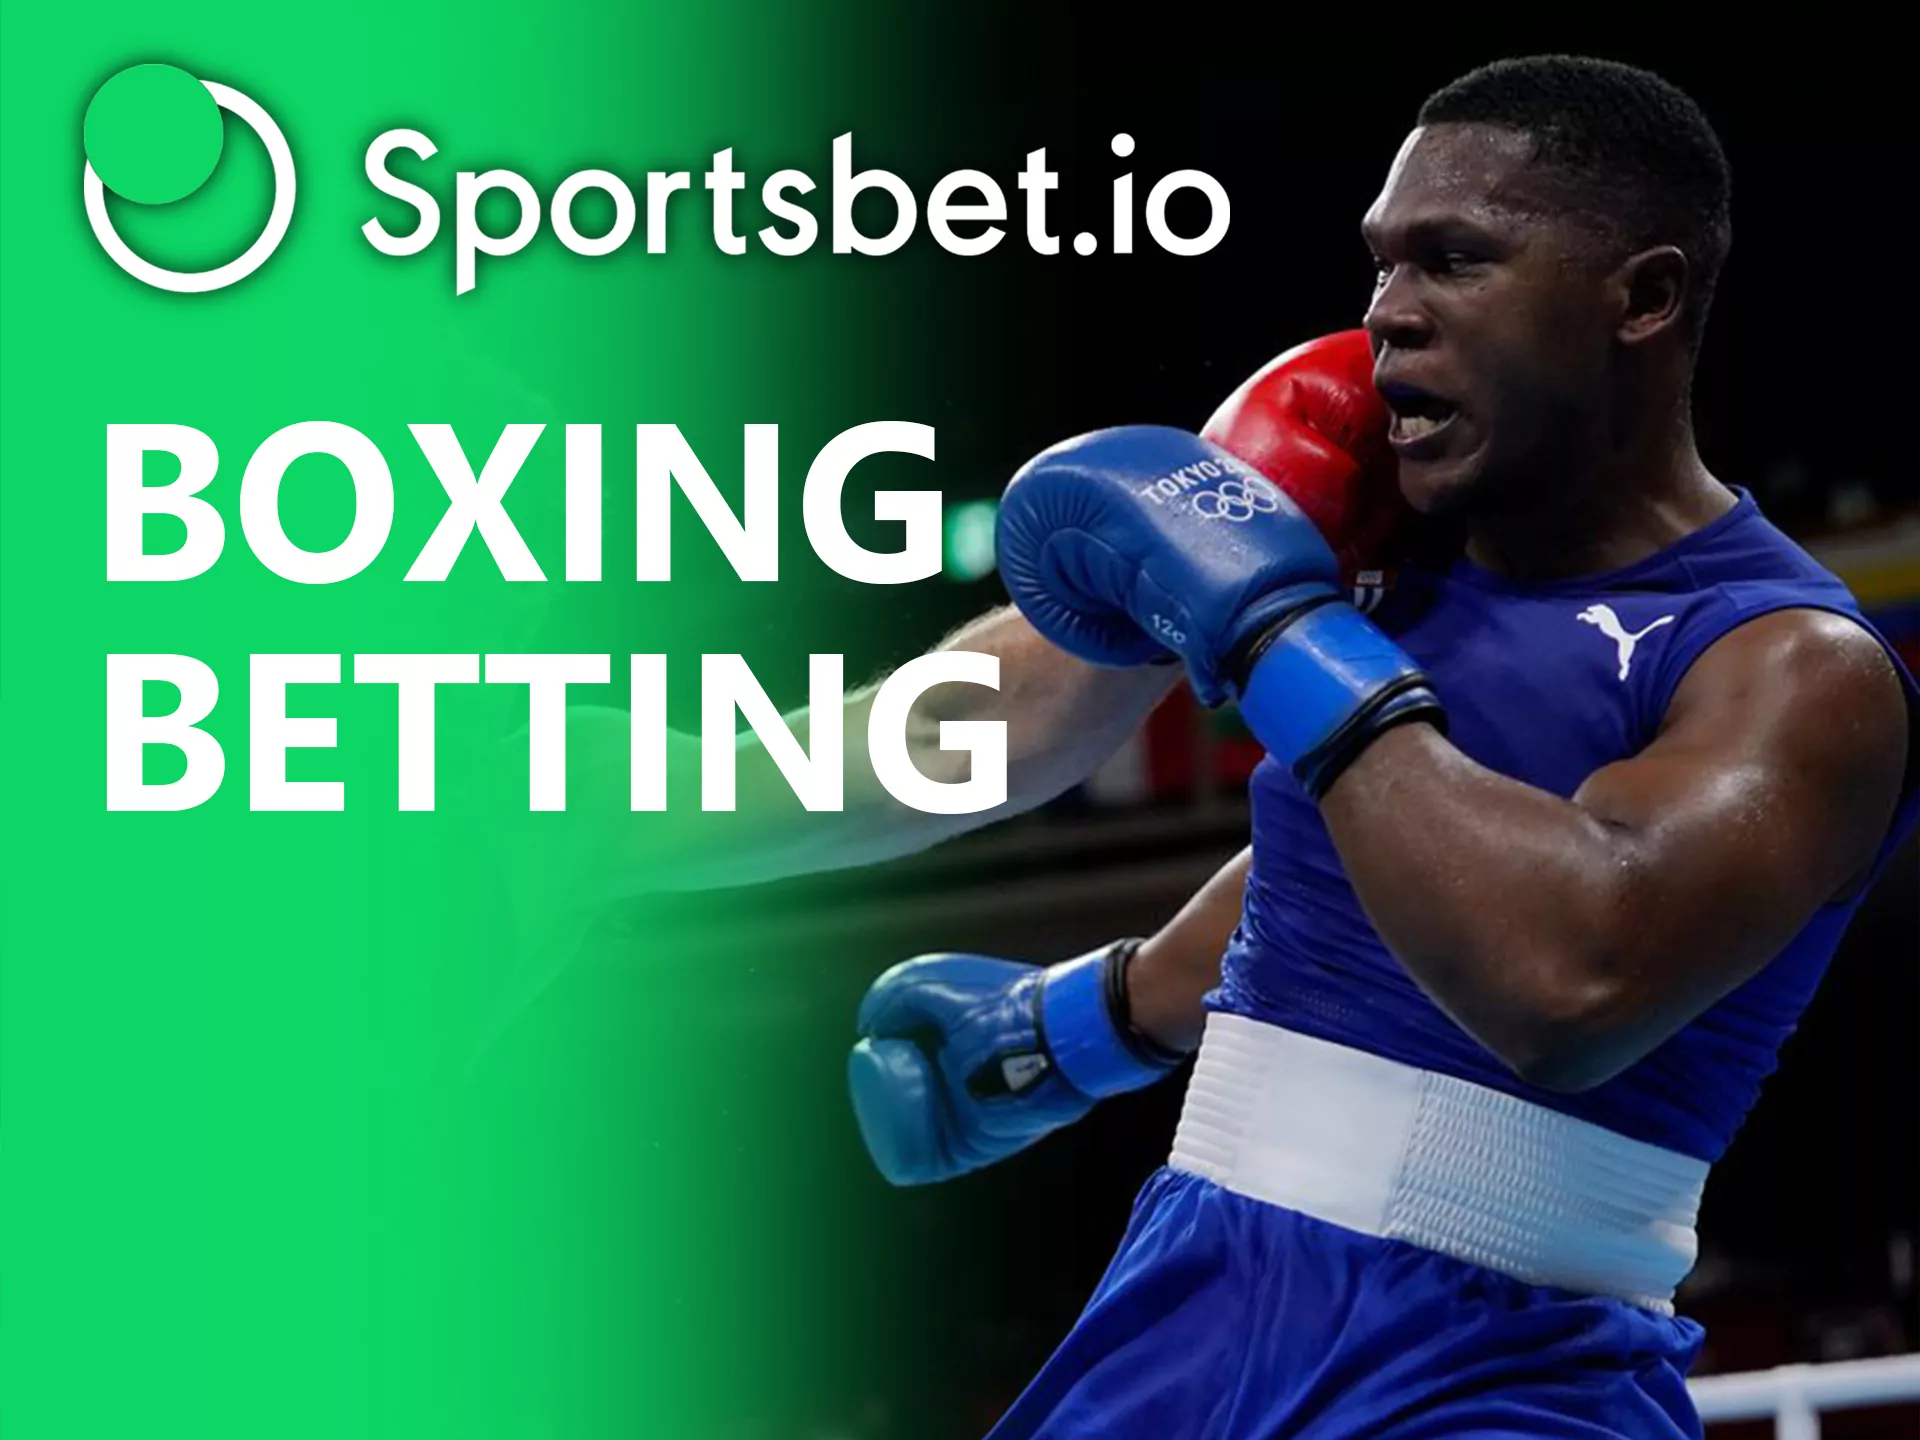 Sportsbet has a wide line on boxing betting.